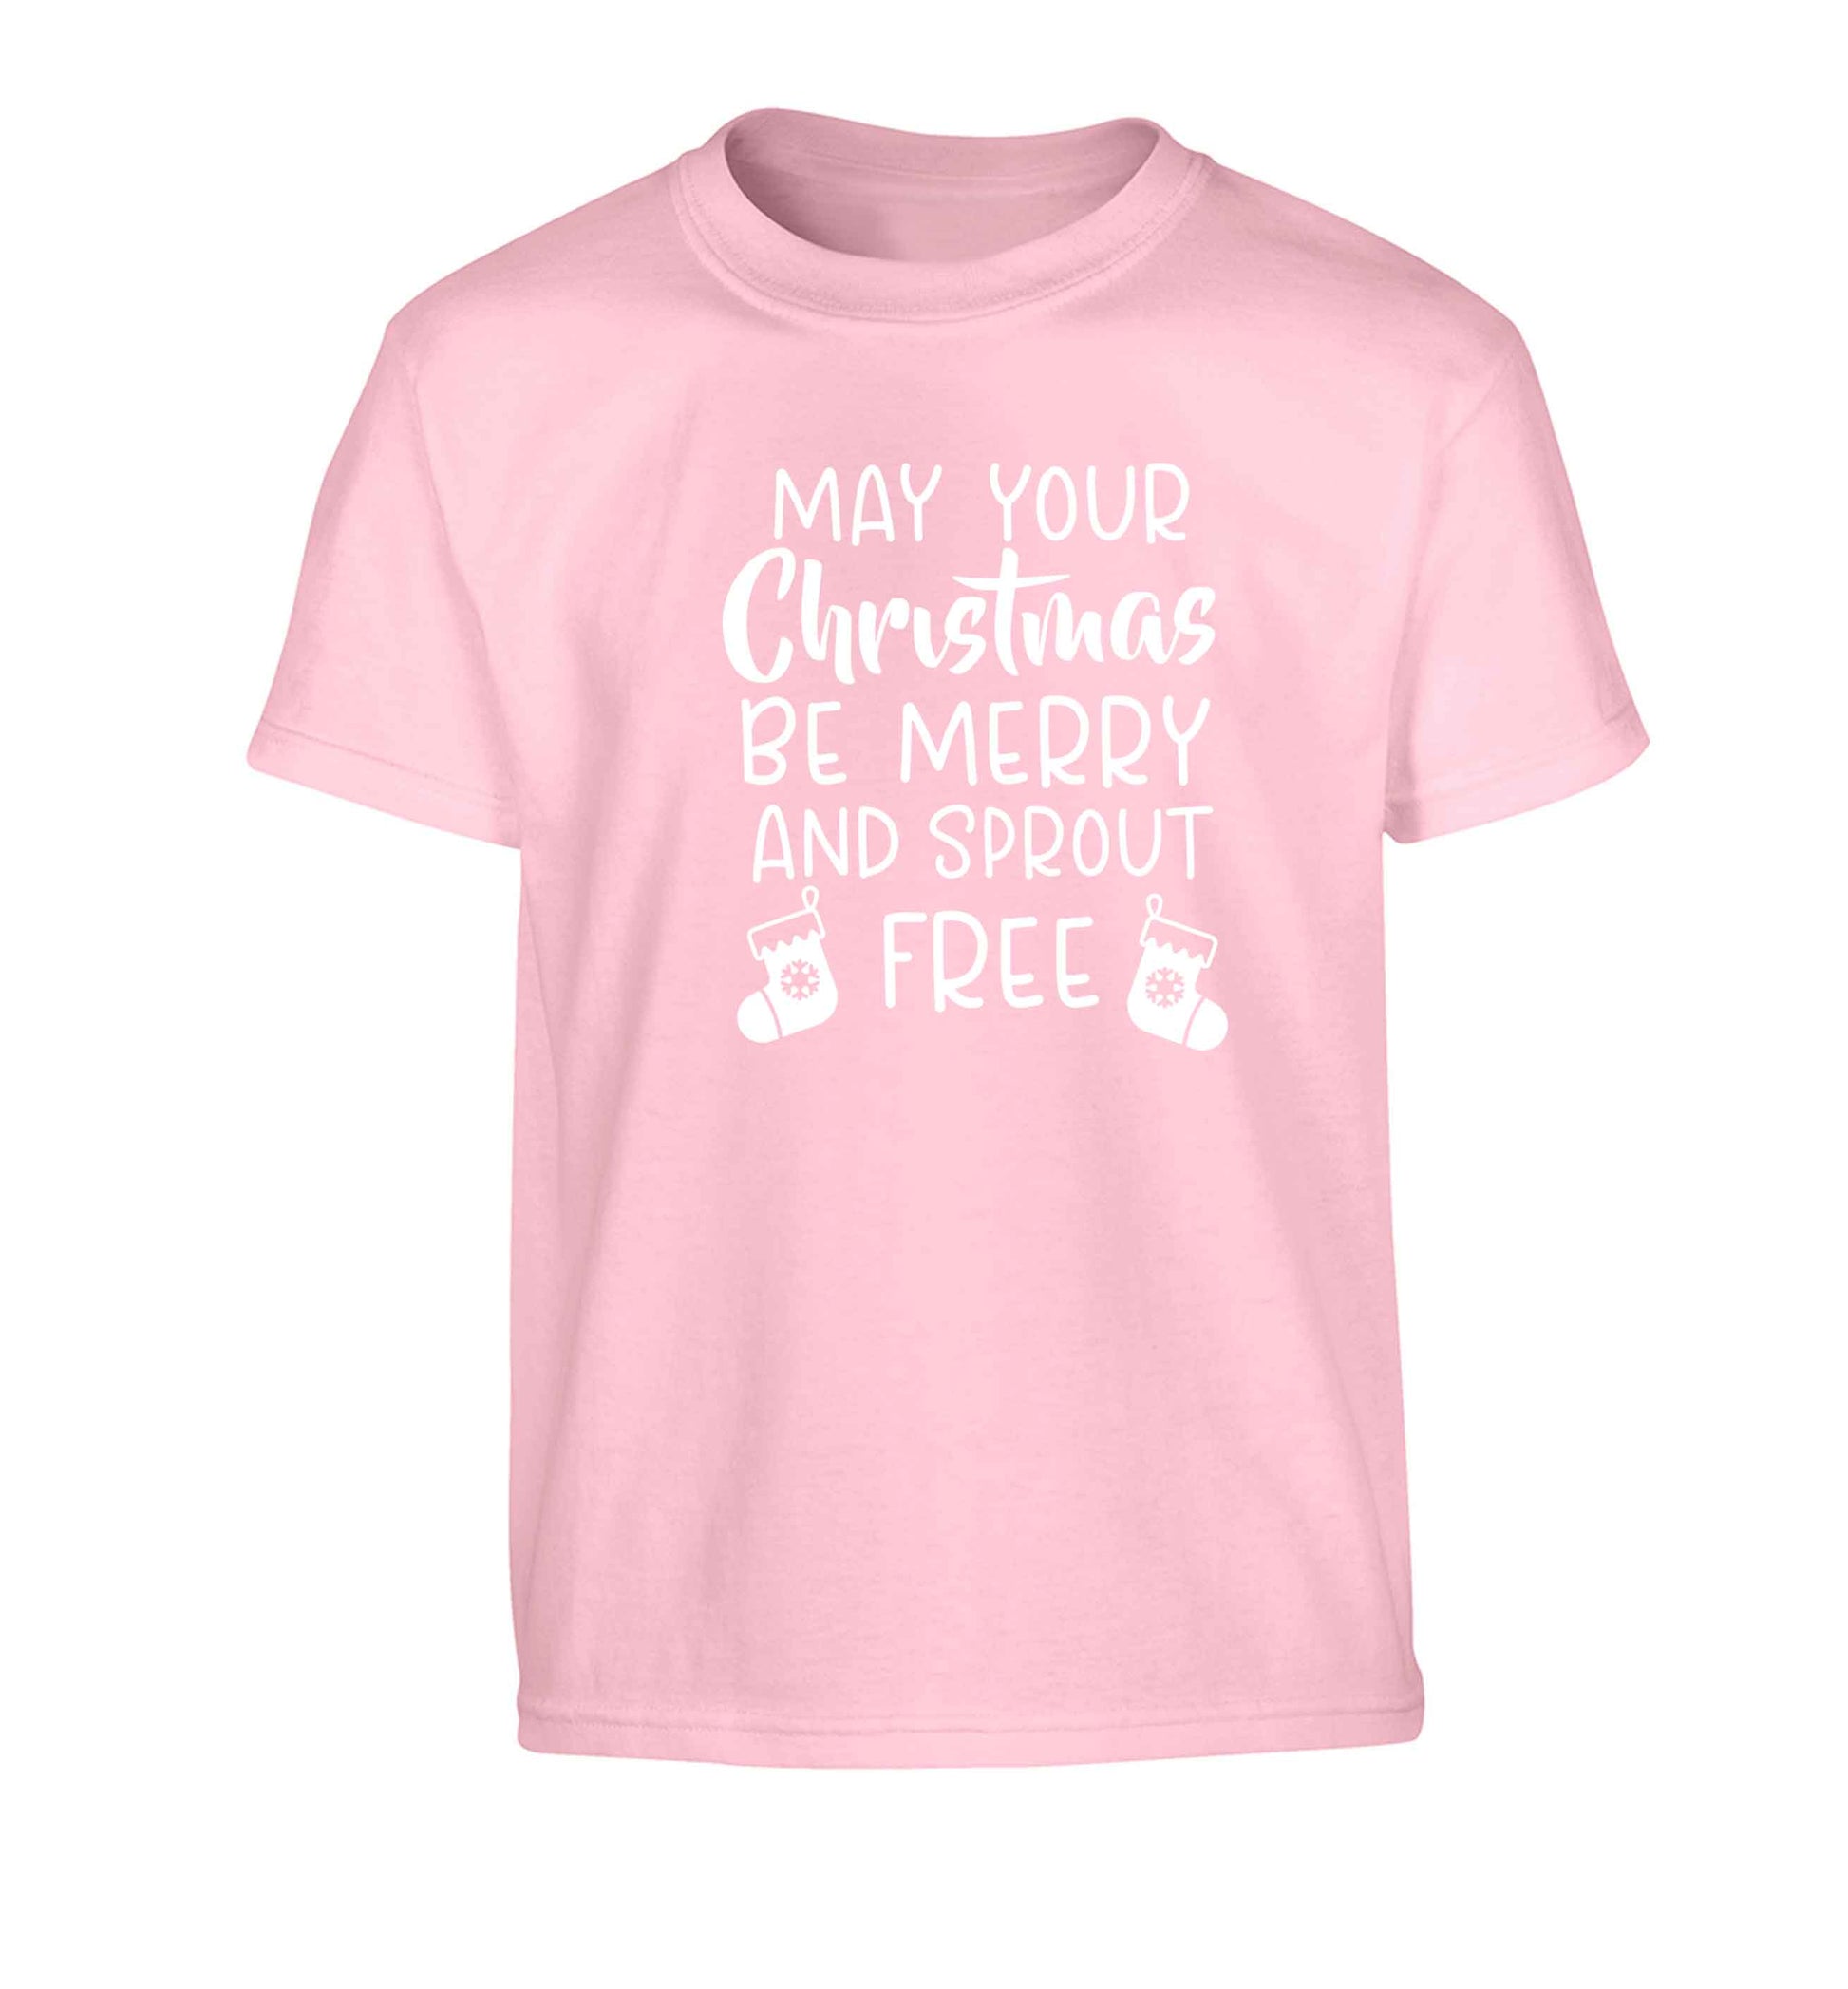 May your Christmas be merry and sprout free Children's light pink Tshirt 12-13 Years